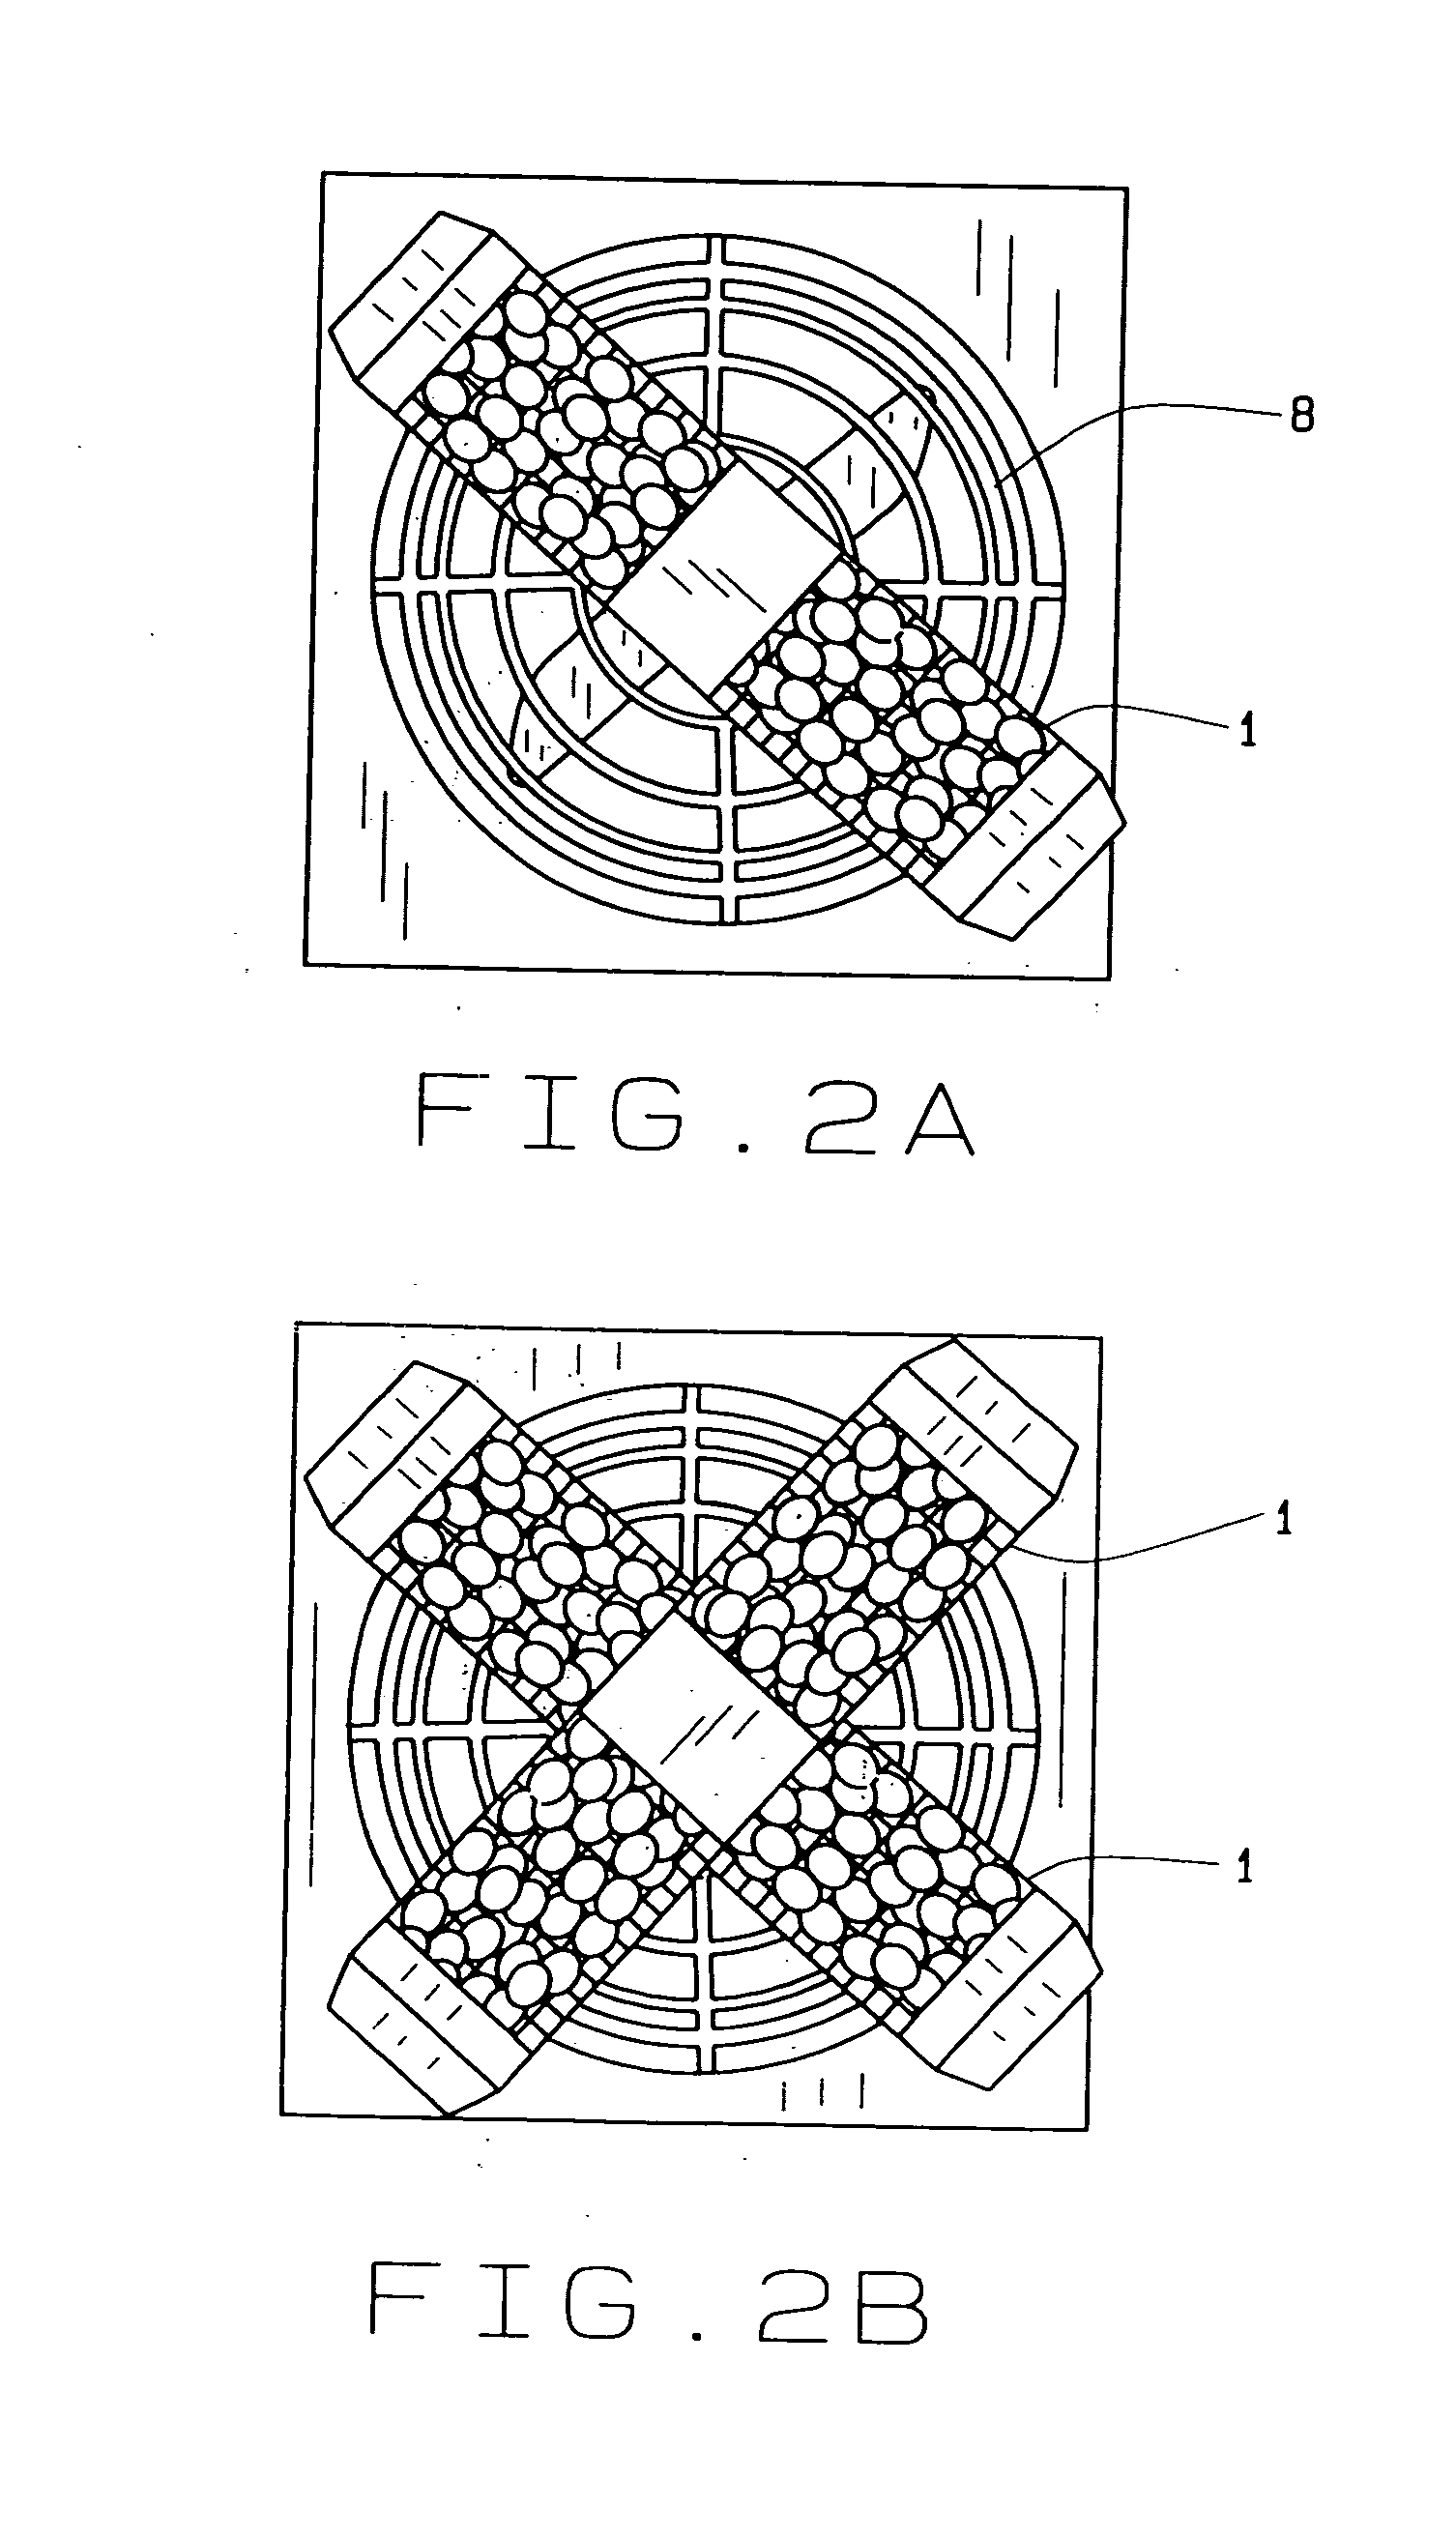 Attachment to air moving device or system for the purpose of scenting spaces